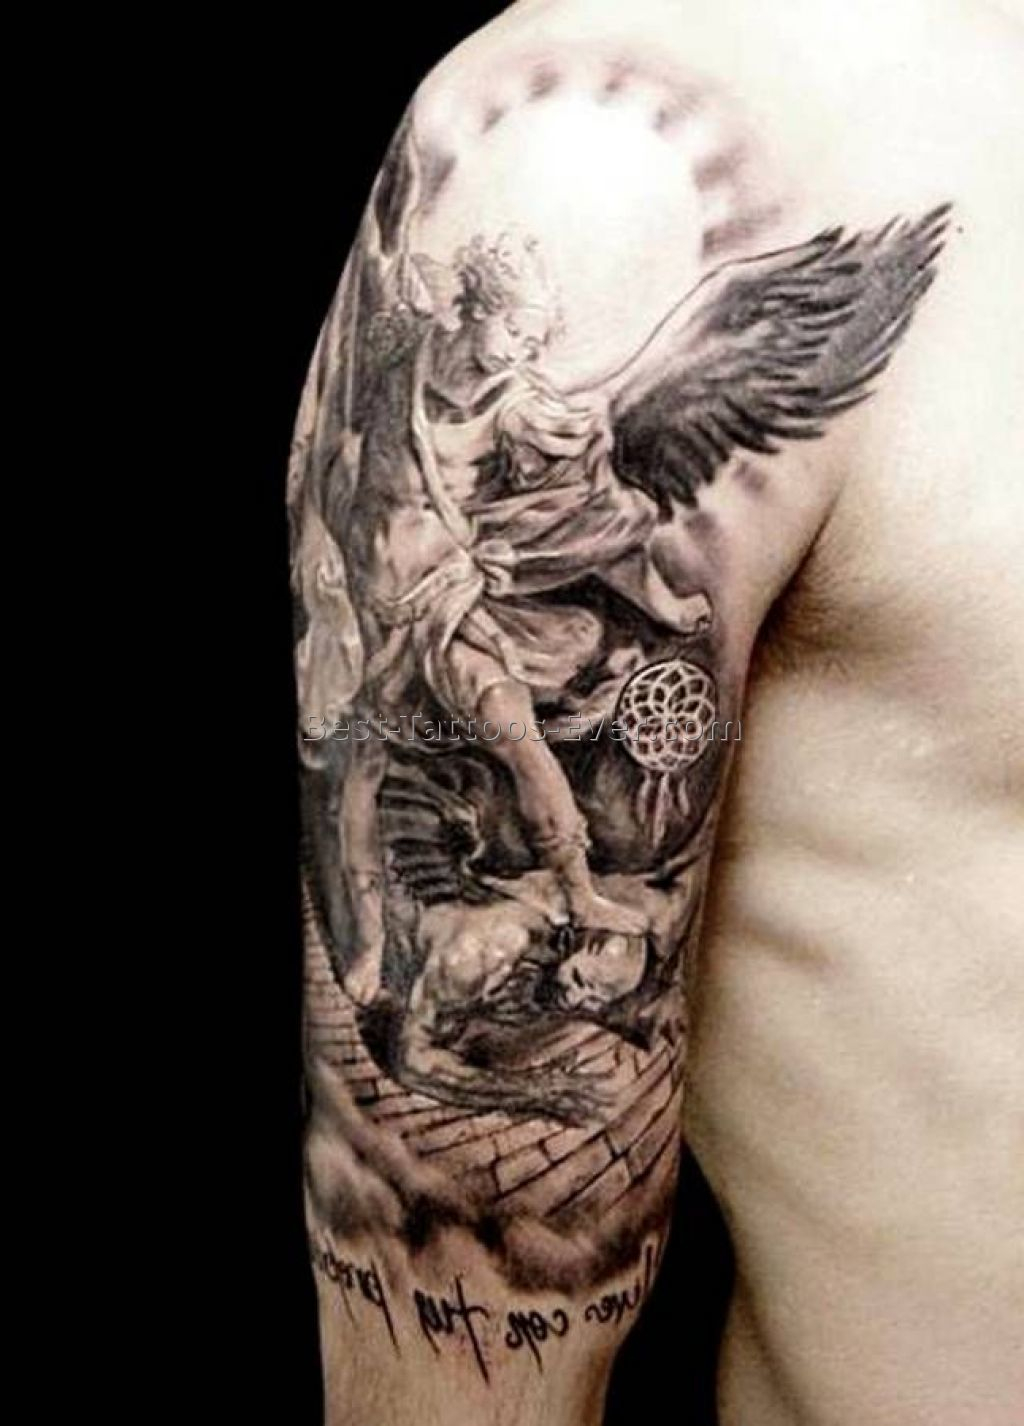 Incredible Fighting Guardian Angel Tattoo On Half Sleeve For Men in dimensions 1024 X 1426